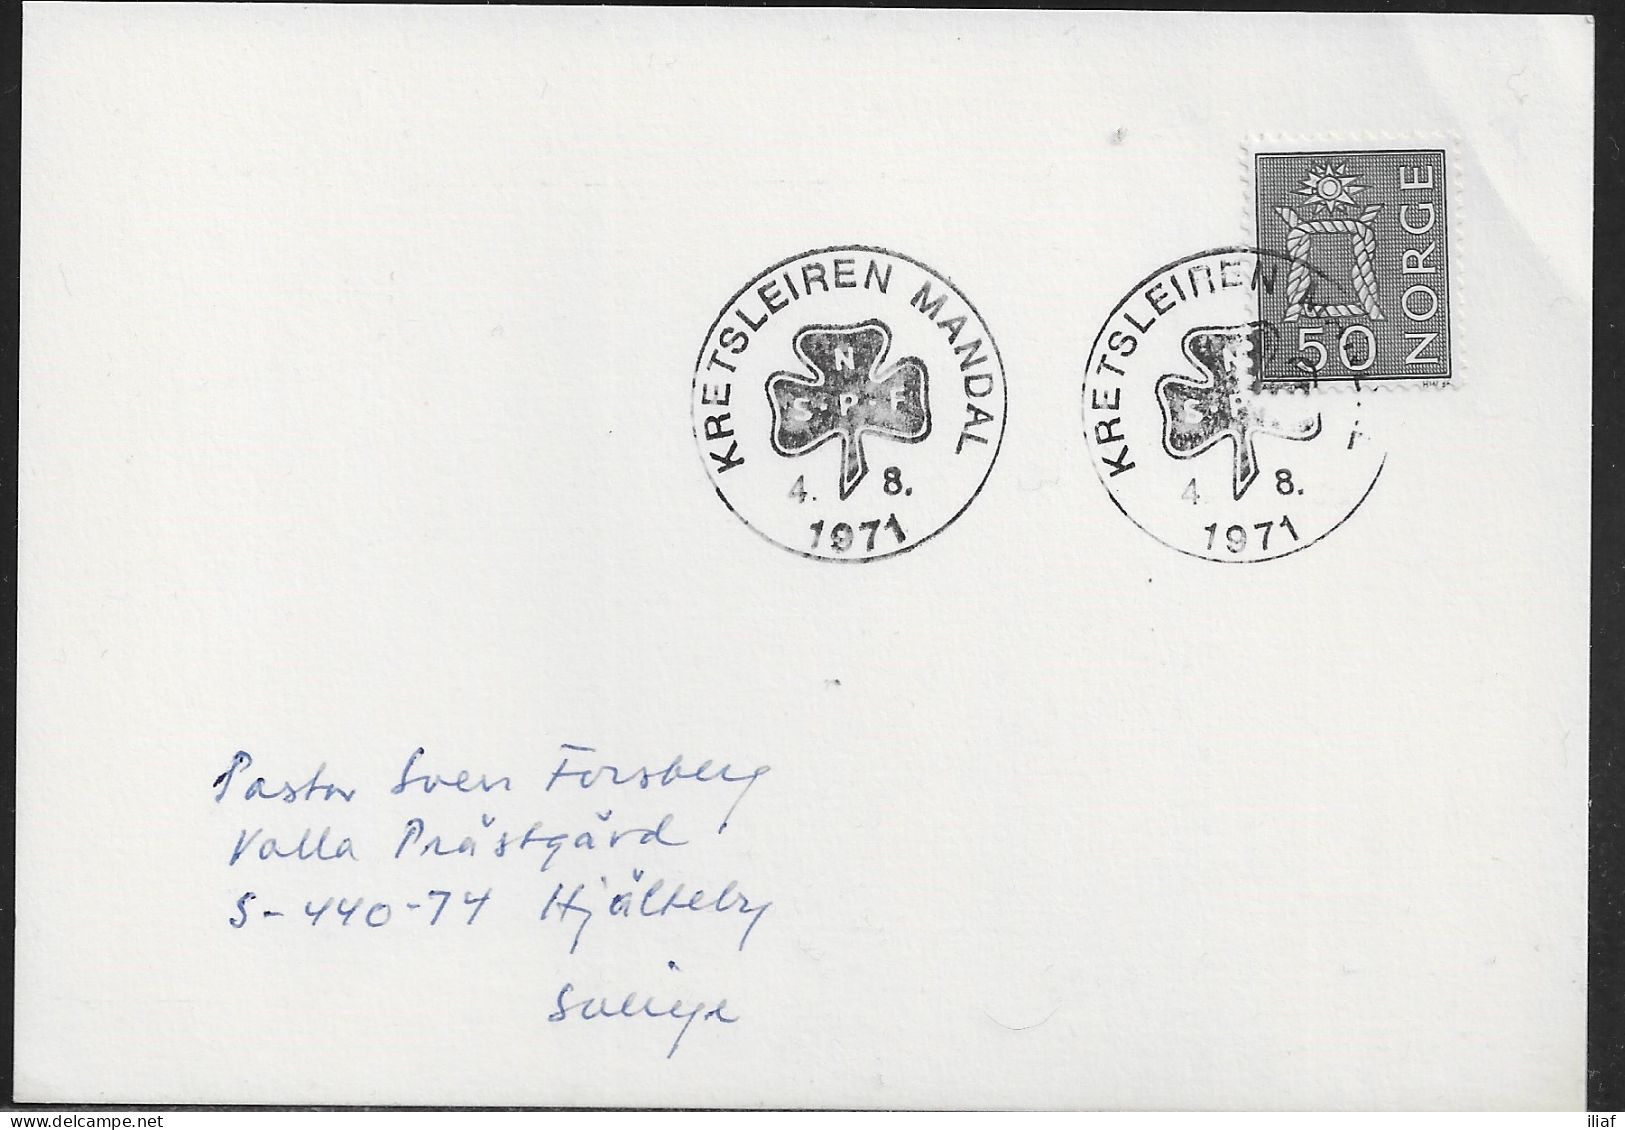 Norway.   A Scout Camp At Mandal 1971 (Norwegian Boy Scout Association).   Norway Special Event Postmark. - Covers & Documents